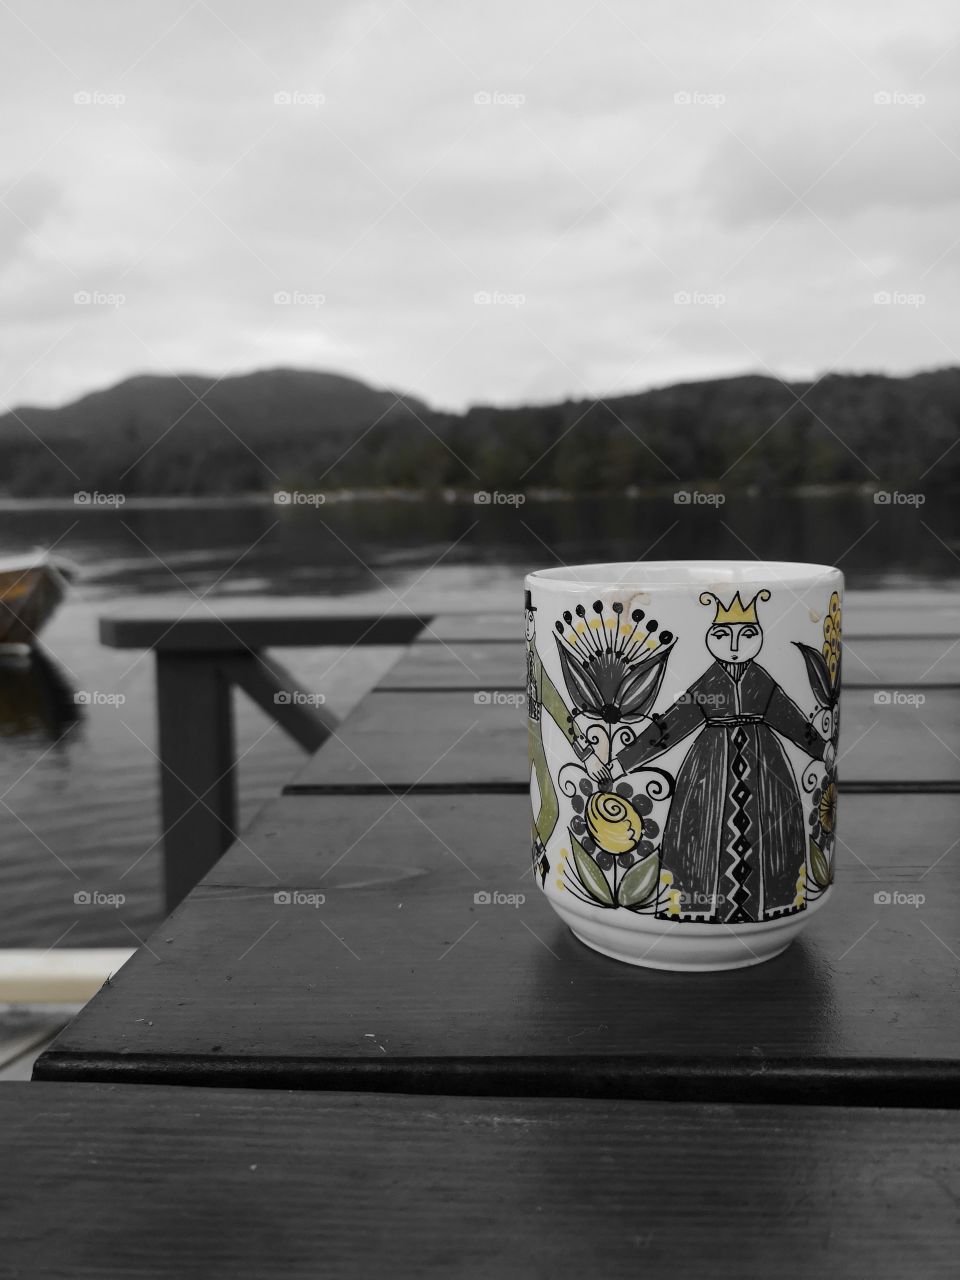 My coffee cup and my boat.